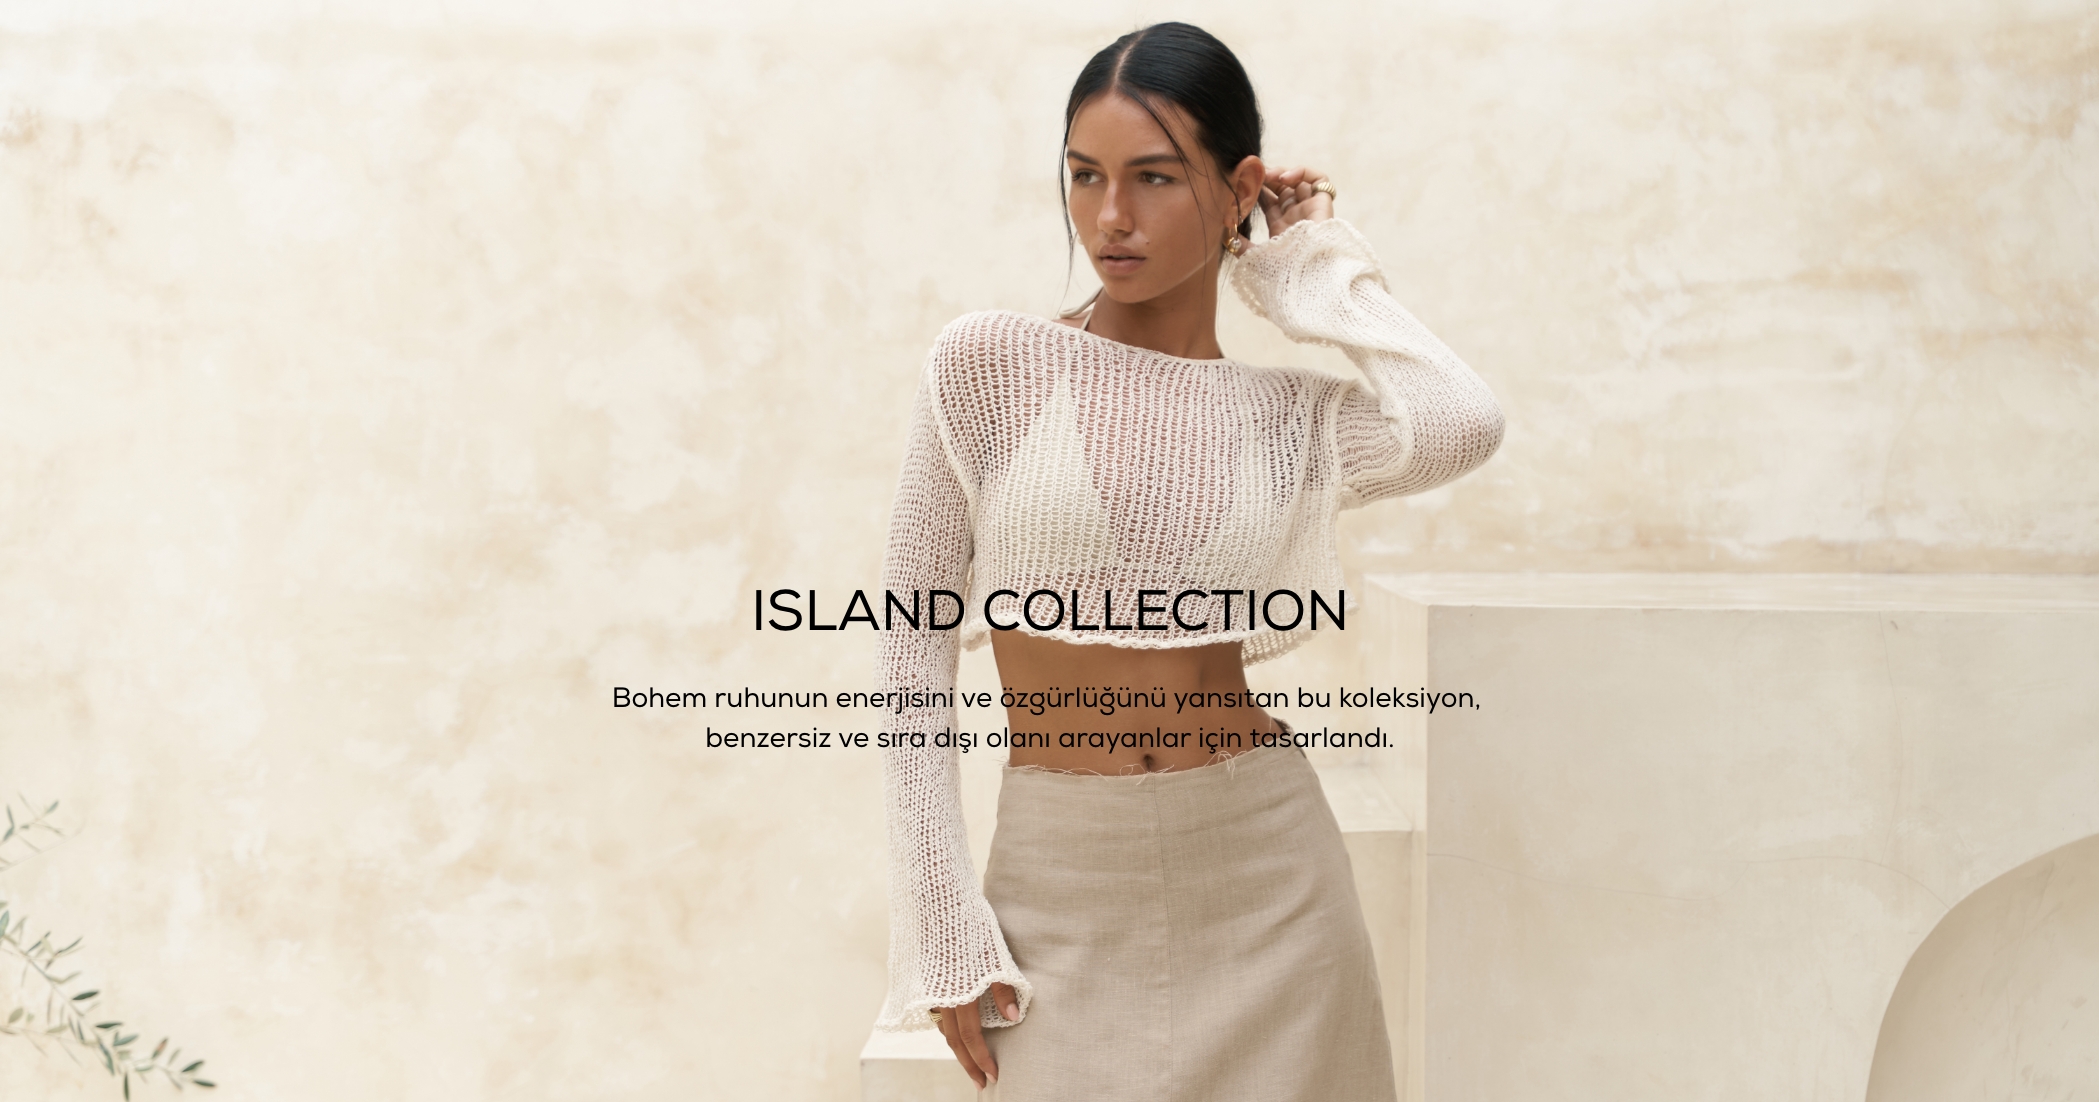 Island Collection